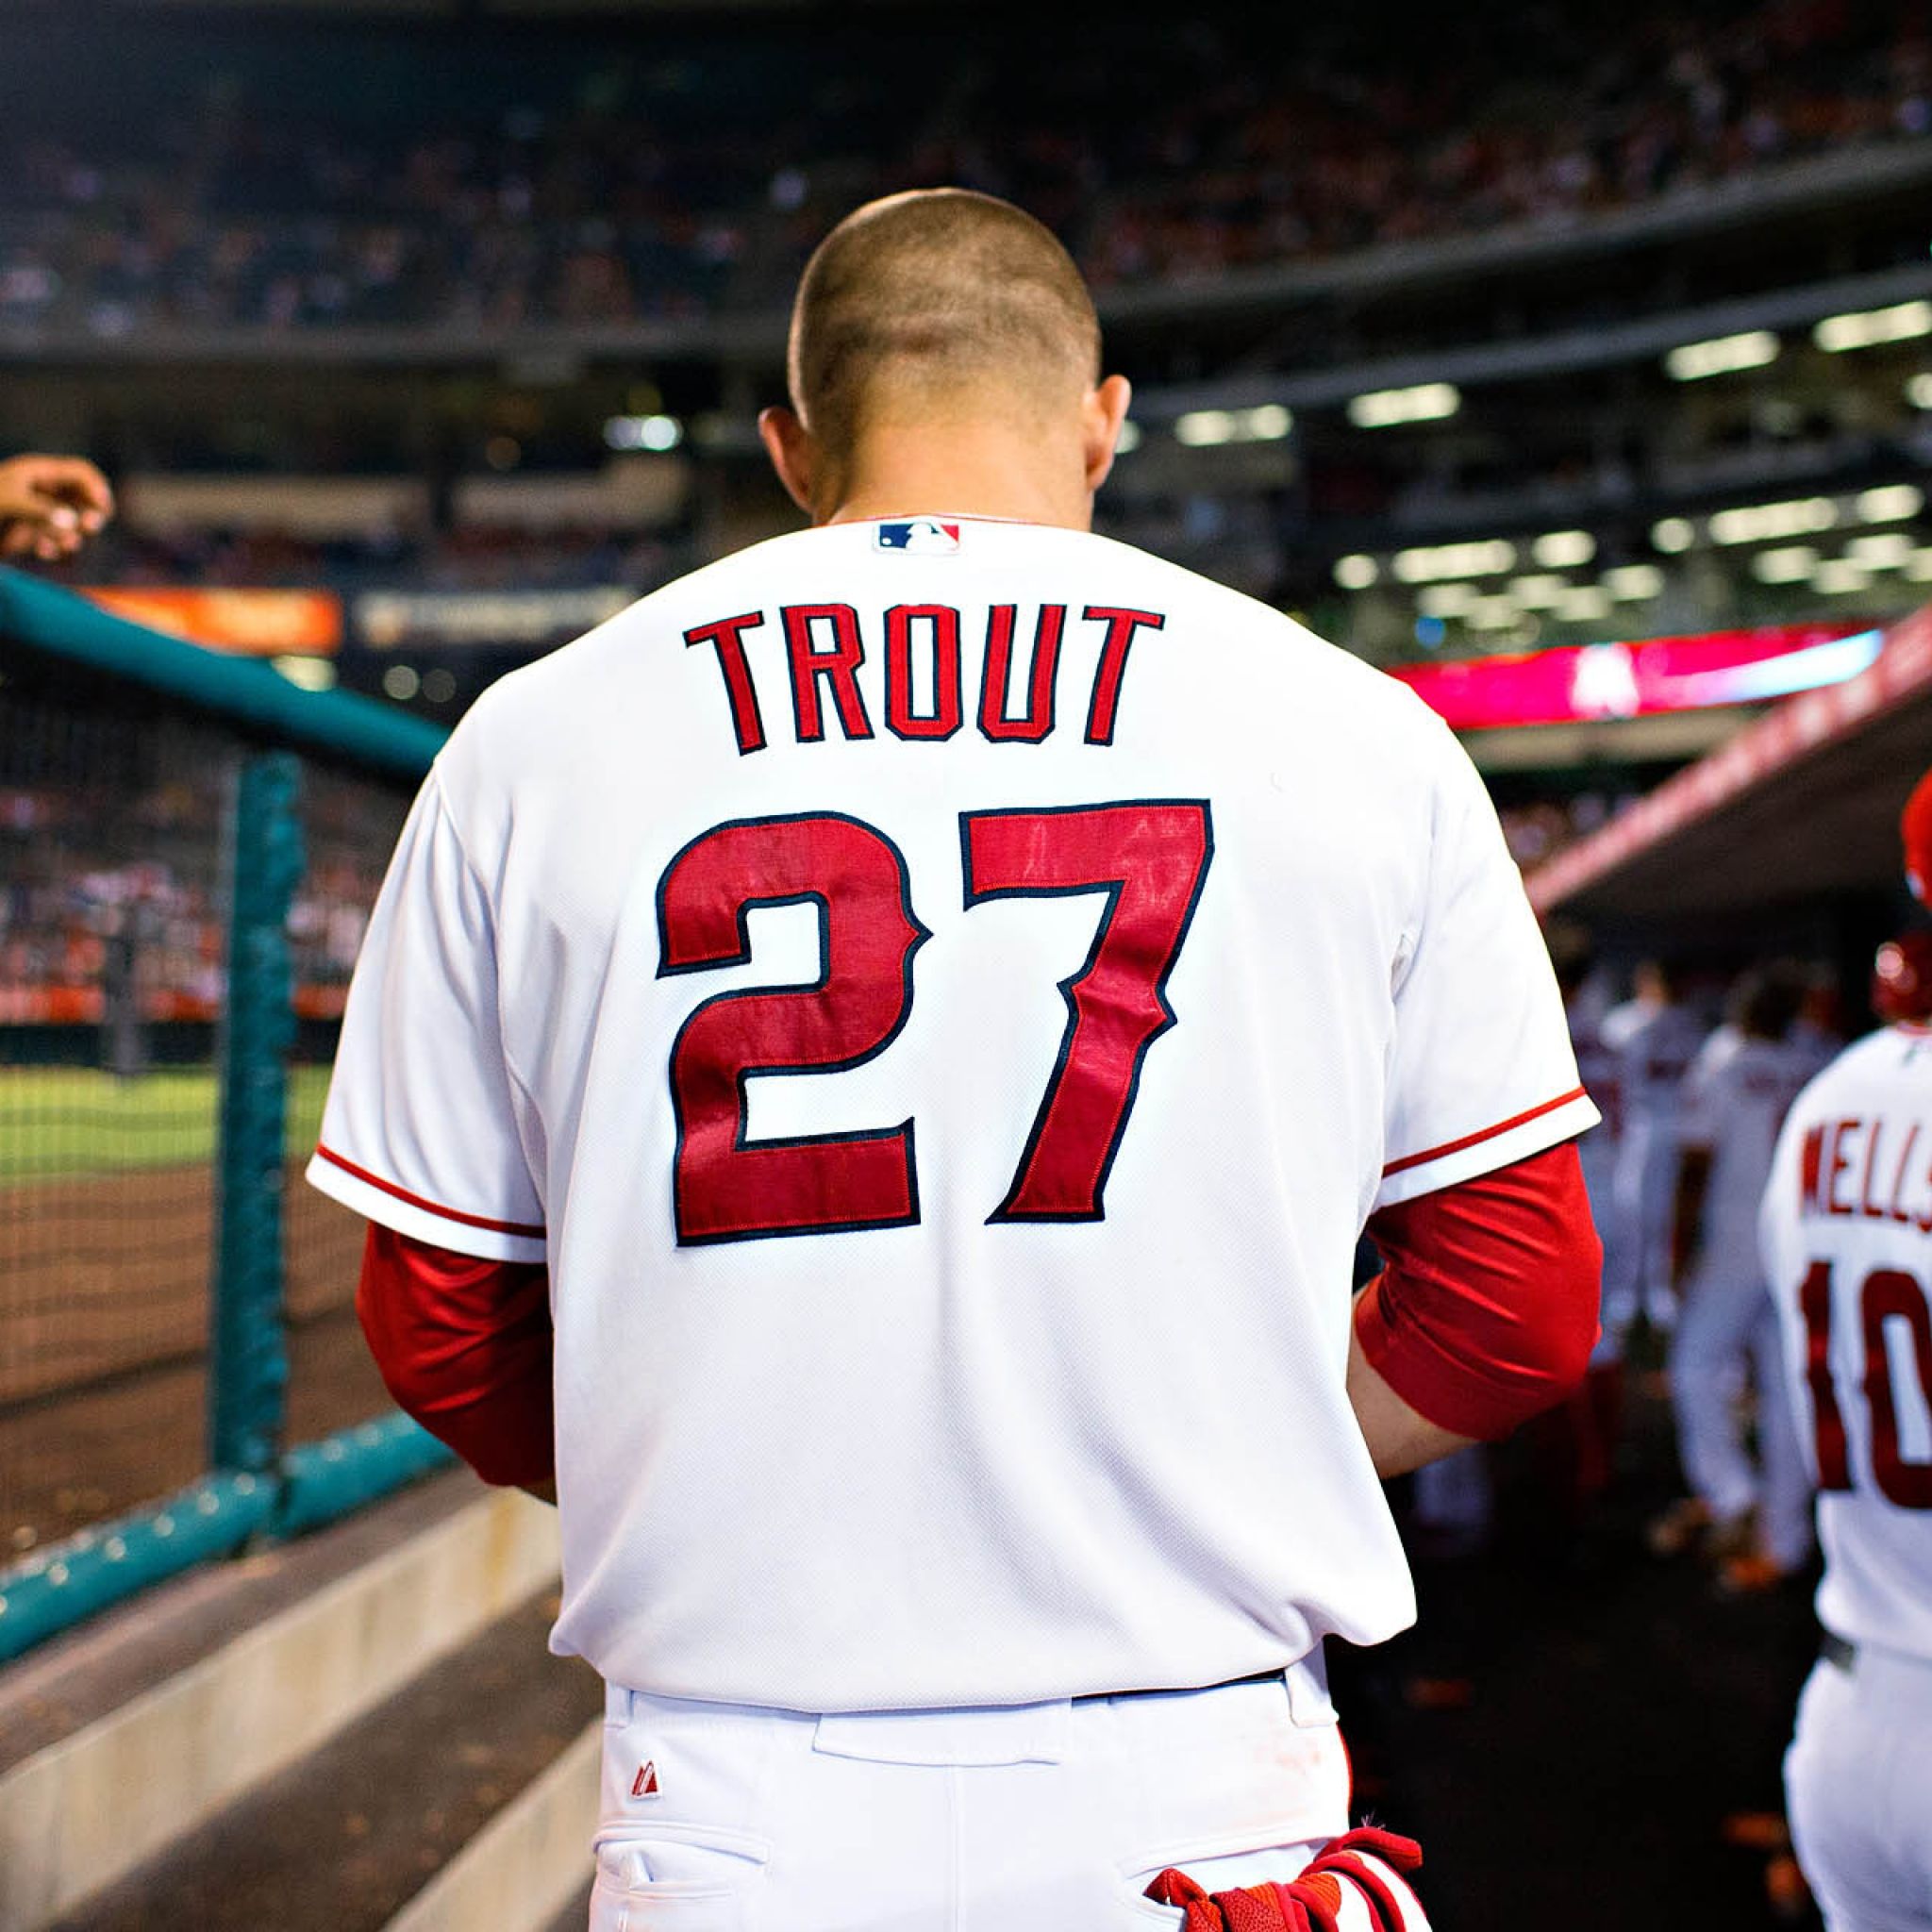 Download Wallpaper 2048x2048 Mike trout, Baseball, Los angeles